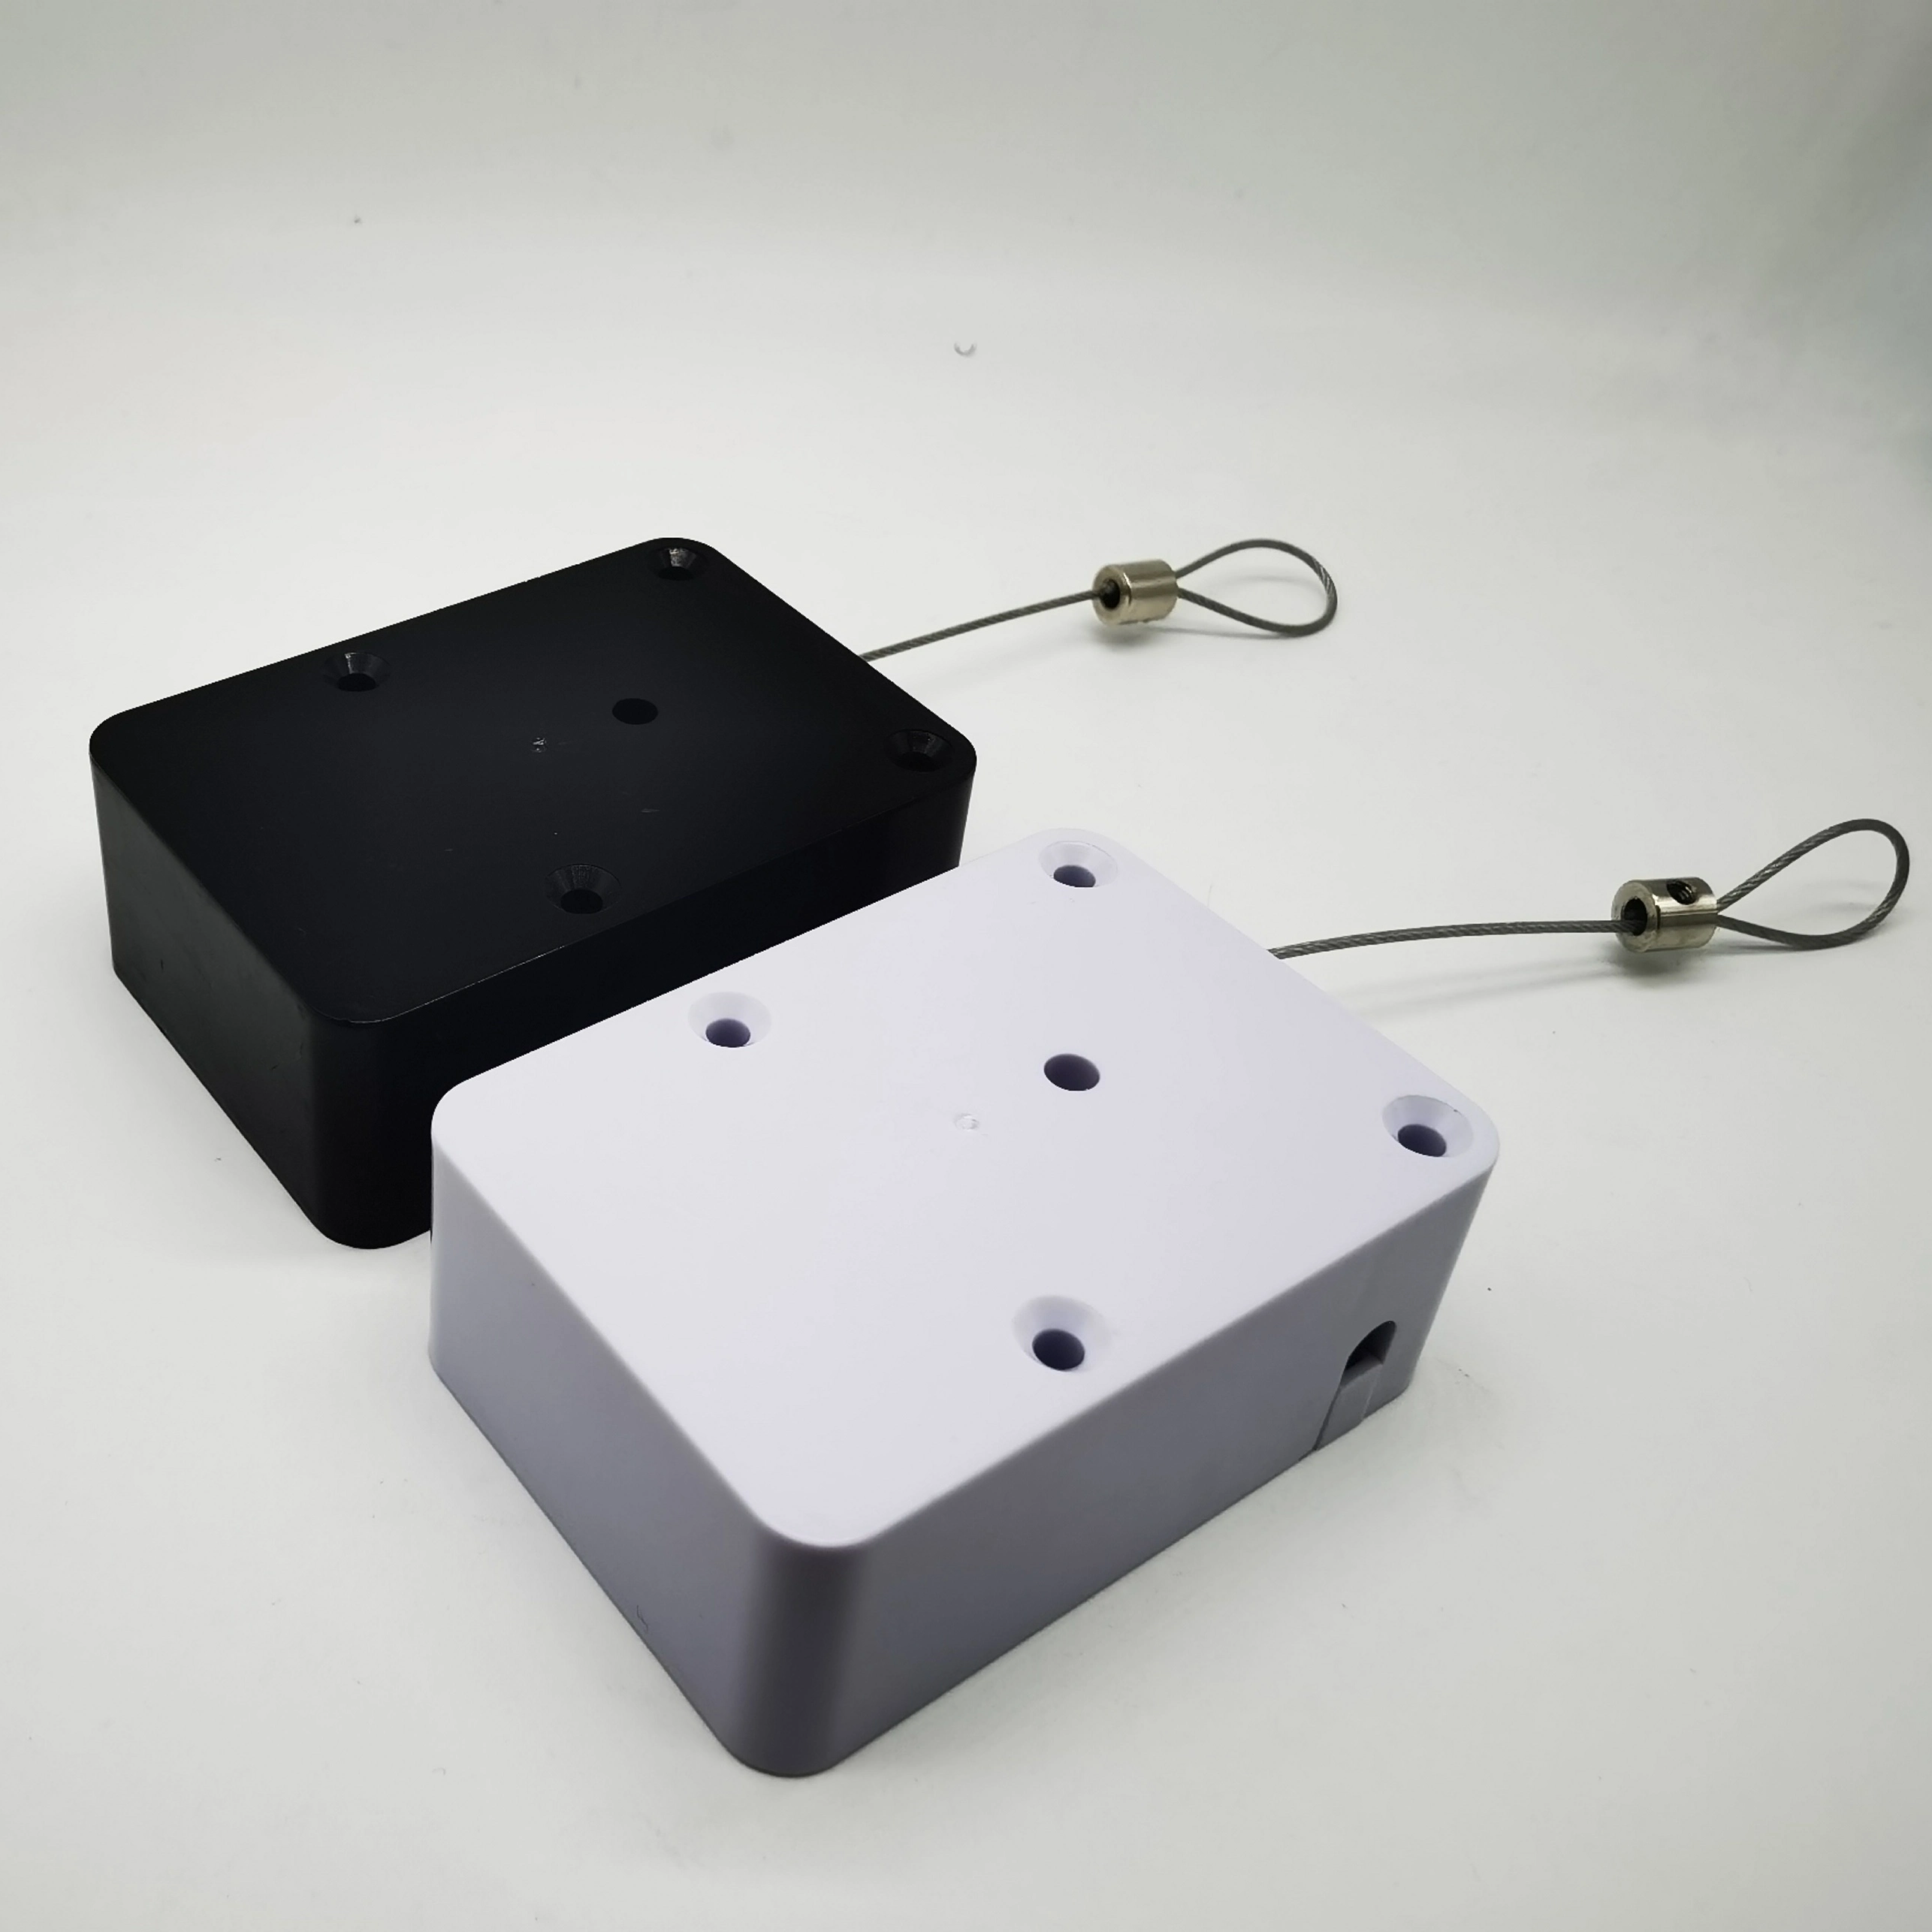 Security Display Strong Location Anti-theft Pullbox tether